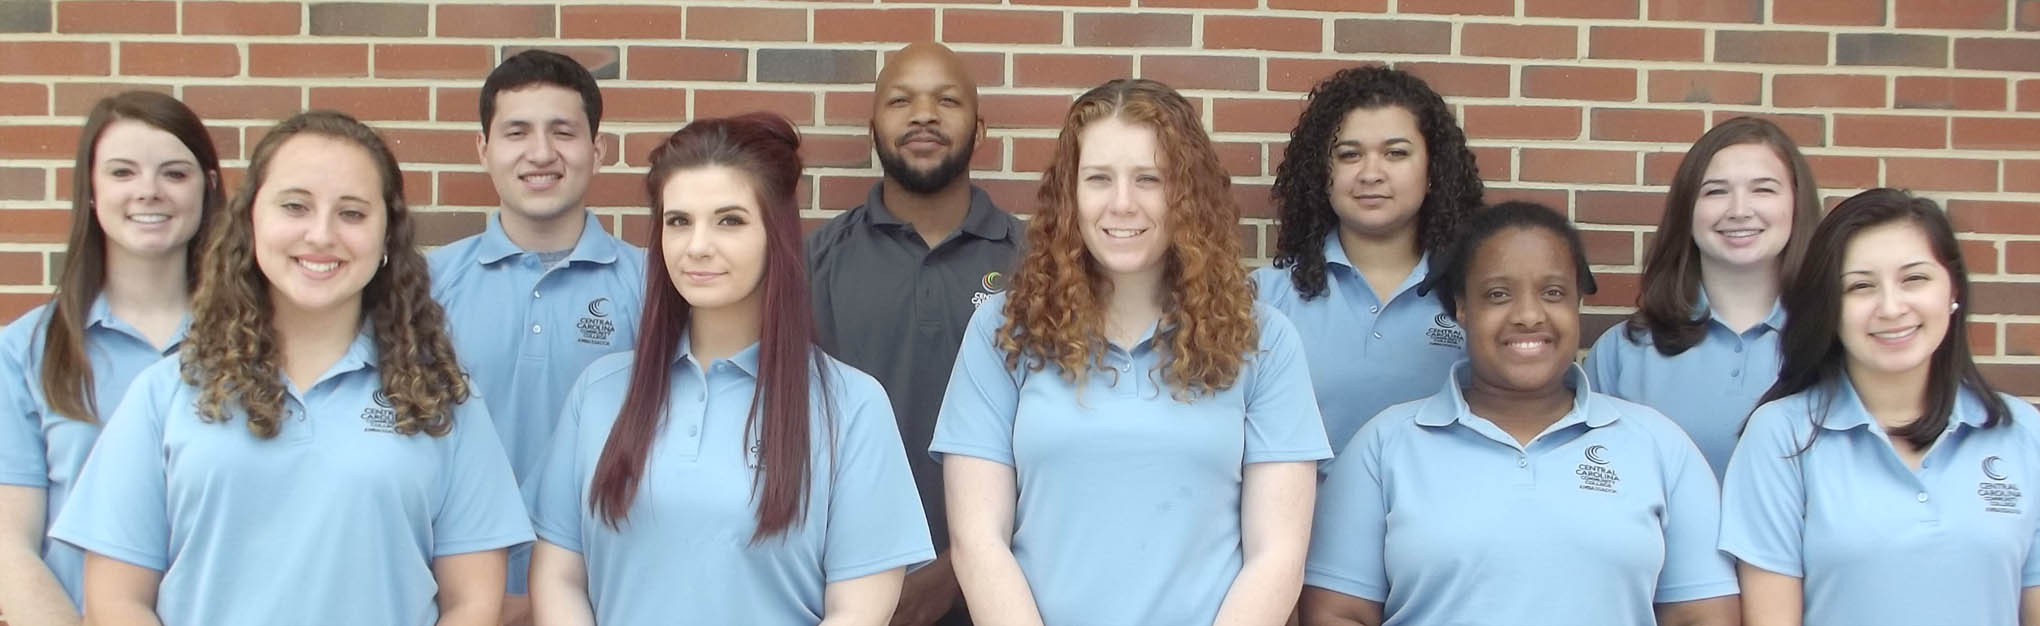 Click to enlarge,  Ten students have been named Student Ambassadors for the 2016-17 school year at Central Carolina Community College. Ambassadors are students who serve as official hosts of the college, representing it at college and community events both on- and off-campus. The 10 students who are serving as Ambassadors for the 2016-17 school year are pictured, left to right: front row, Lydia Cooper of Sanford, Carly Dube of Andover, Mass., Briana Peterman of Sanford, Tiffany Gee of Stone Mountain, Ga., and Ruvi Rodriguez Suarez of Robbins; back row, Courtney May of Apex, Noel Martinez of Sanford, Rasheed Jones of Goldston, Kyla Ross of Dunn, and Leslie Bridges of Sanford. Aaron Mabe is the Student Ambassadors Advisor. "These Ambassadors are the finest representatives Central Carolina Community College could have," said CCCC President T.E. Marchant. "I am proud of how they carry out their responsibilities, creating goodwill and respect for the College wherever they give presentations or serve. In addition, their experiences as Ambassadors instill within them qualities that will benefit them, their families, their employers, and their communities for the rest of their lives." 